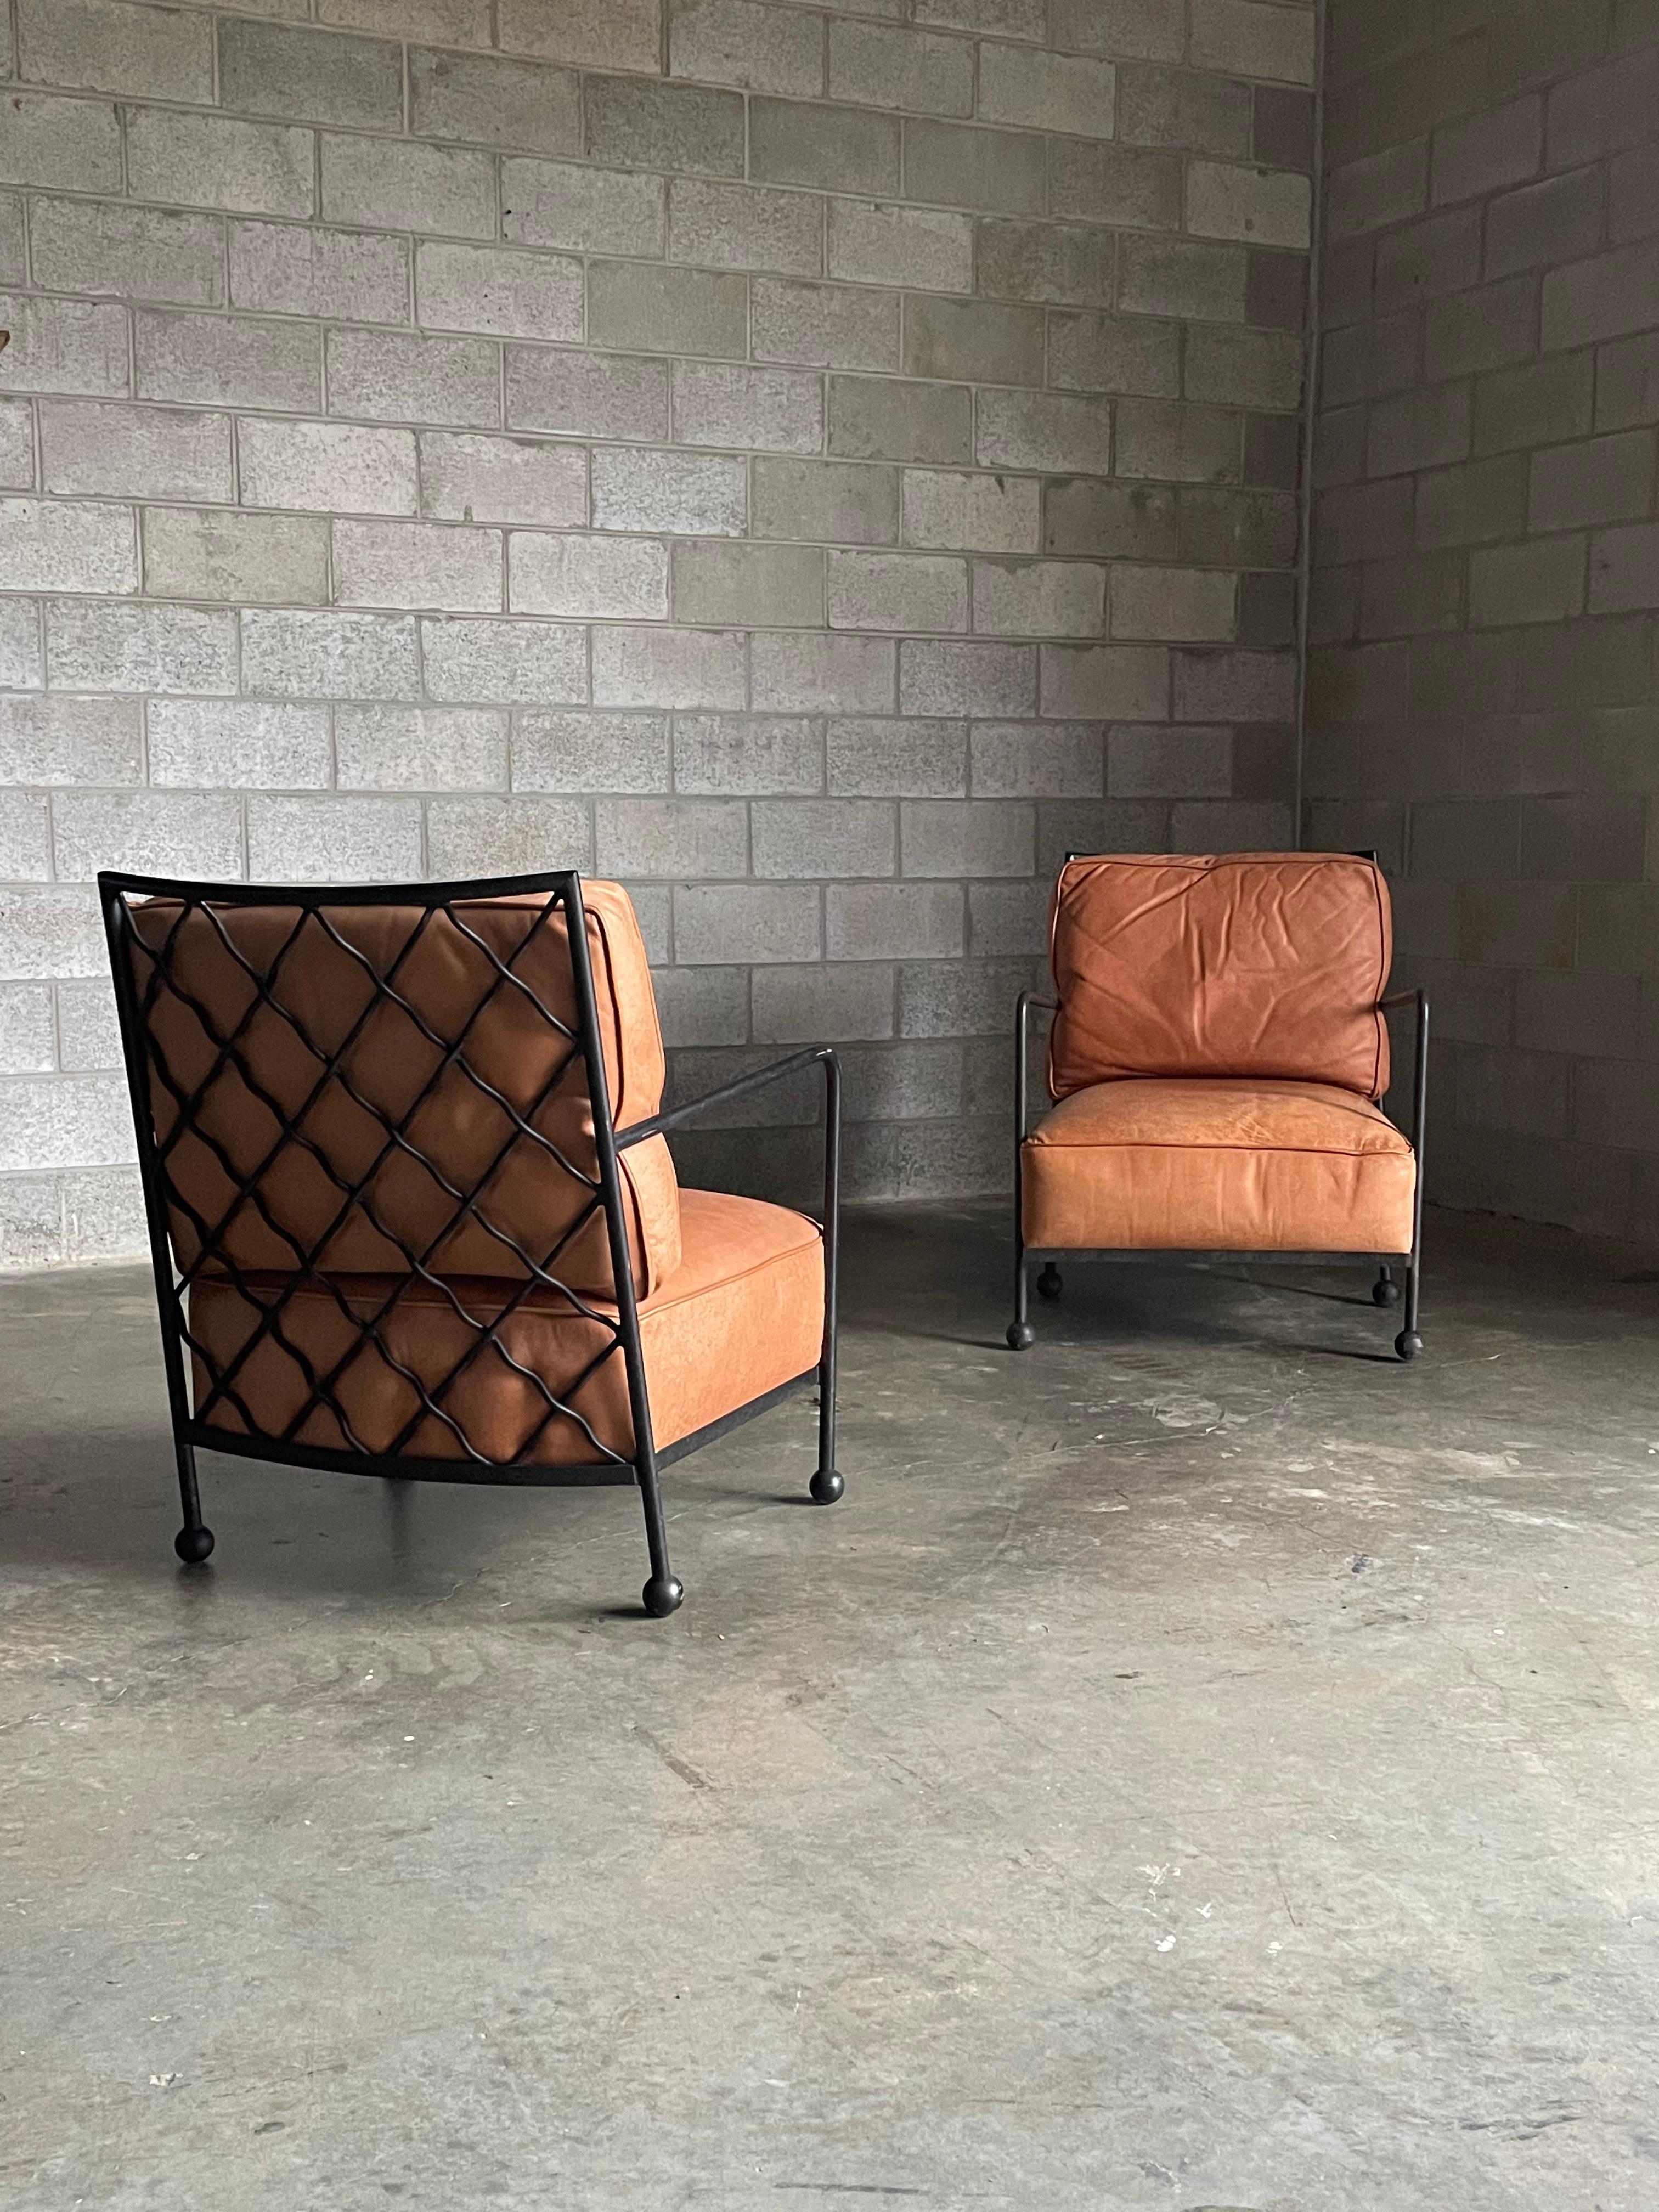 A gorgeous pair of chairs in the style of Jean Royére's 